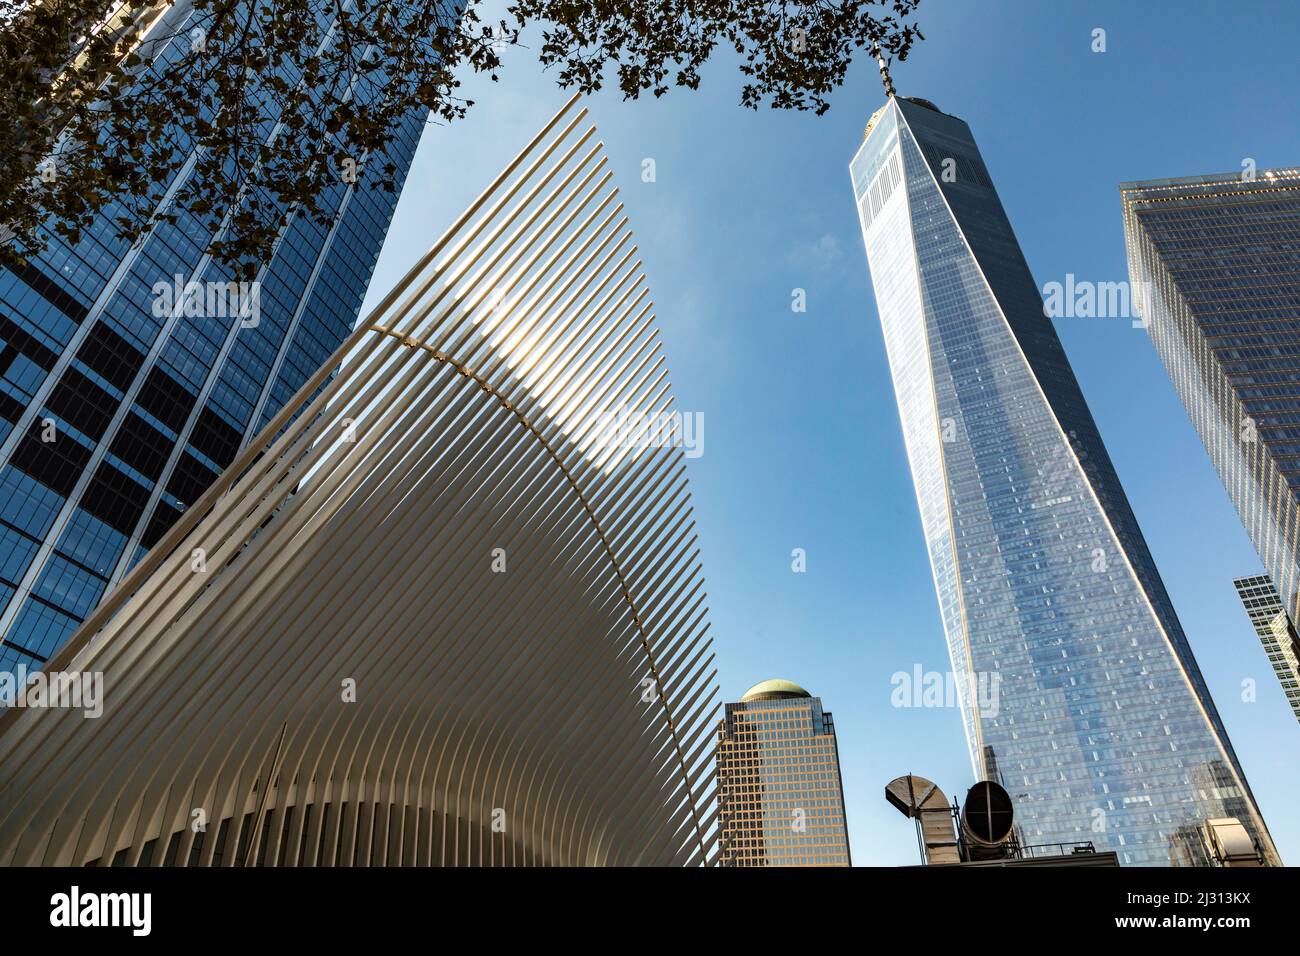 NEW YORK, USA - OCT 6, 2017: Distinctive architectural form of the Oculus transportation hub stands in front of a bright view of the One World Trade C Stock Photo